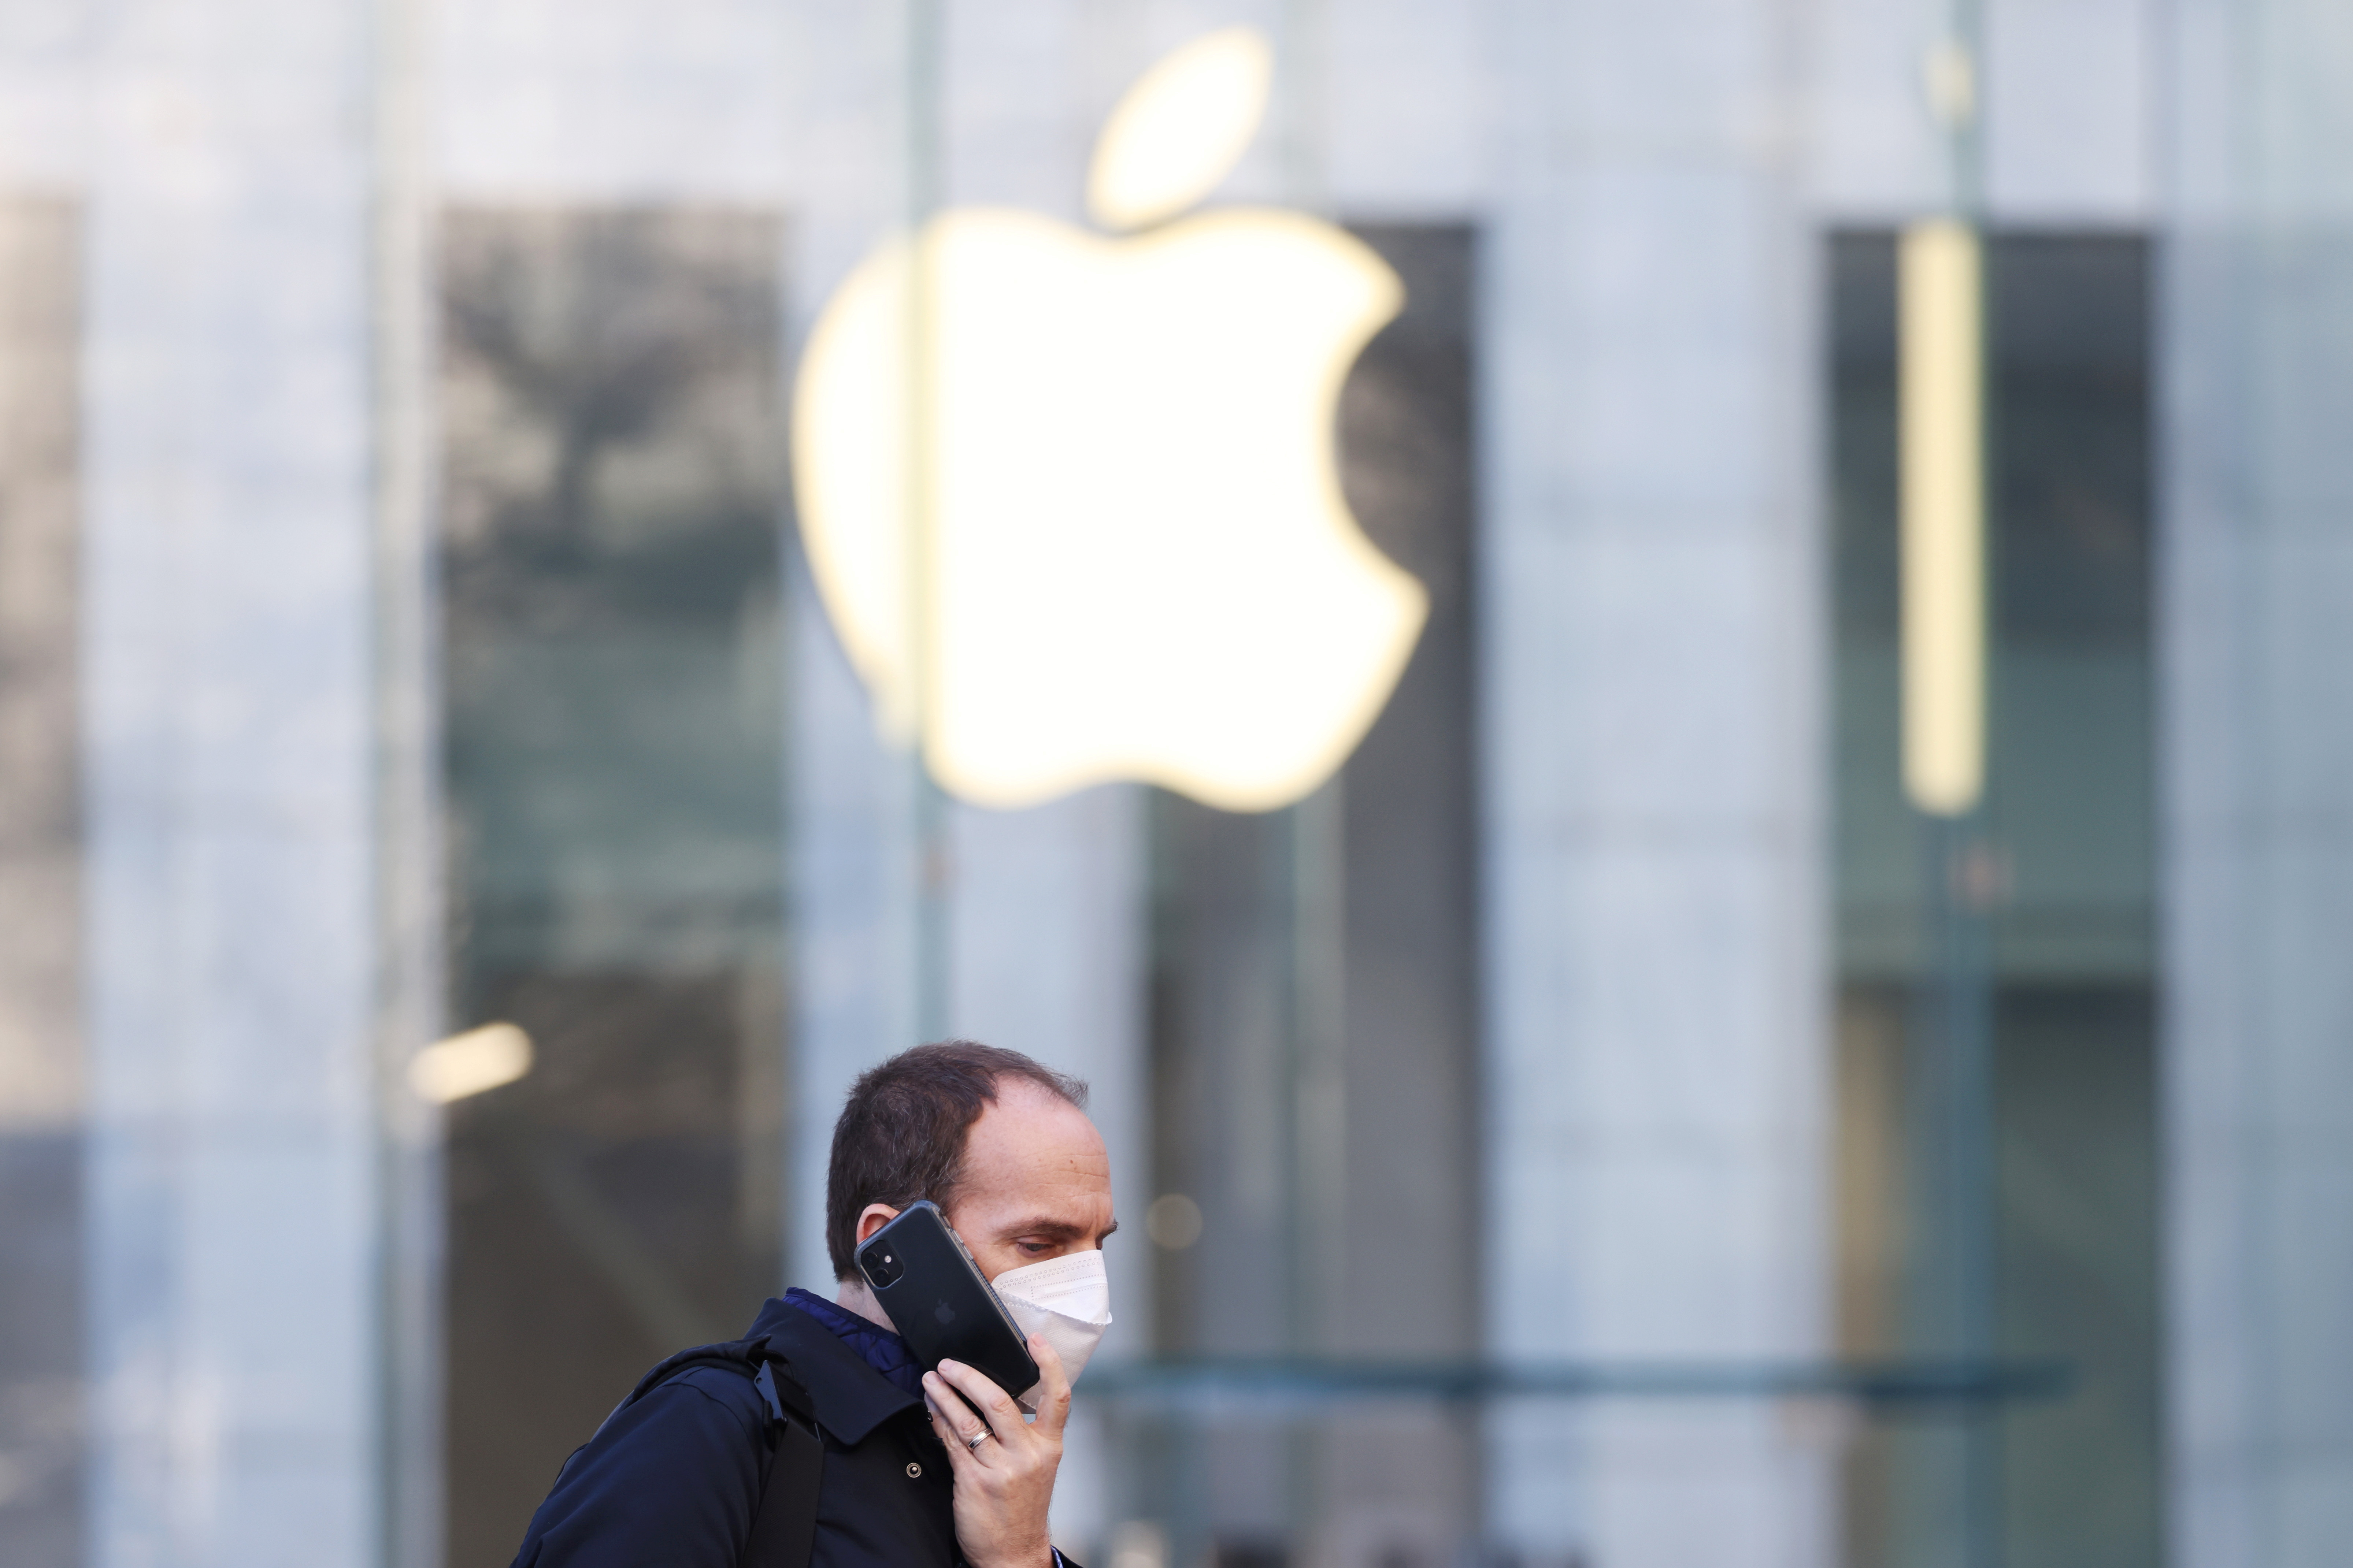 A person uses smartphone near an Apple Store in Manhattan, New York City